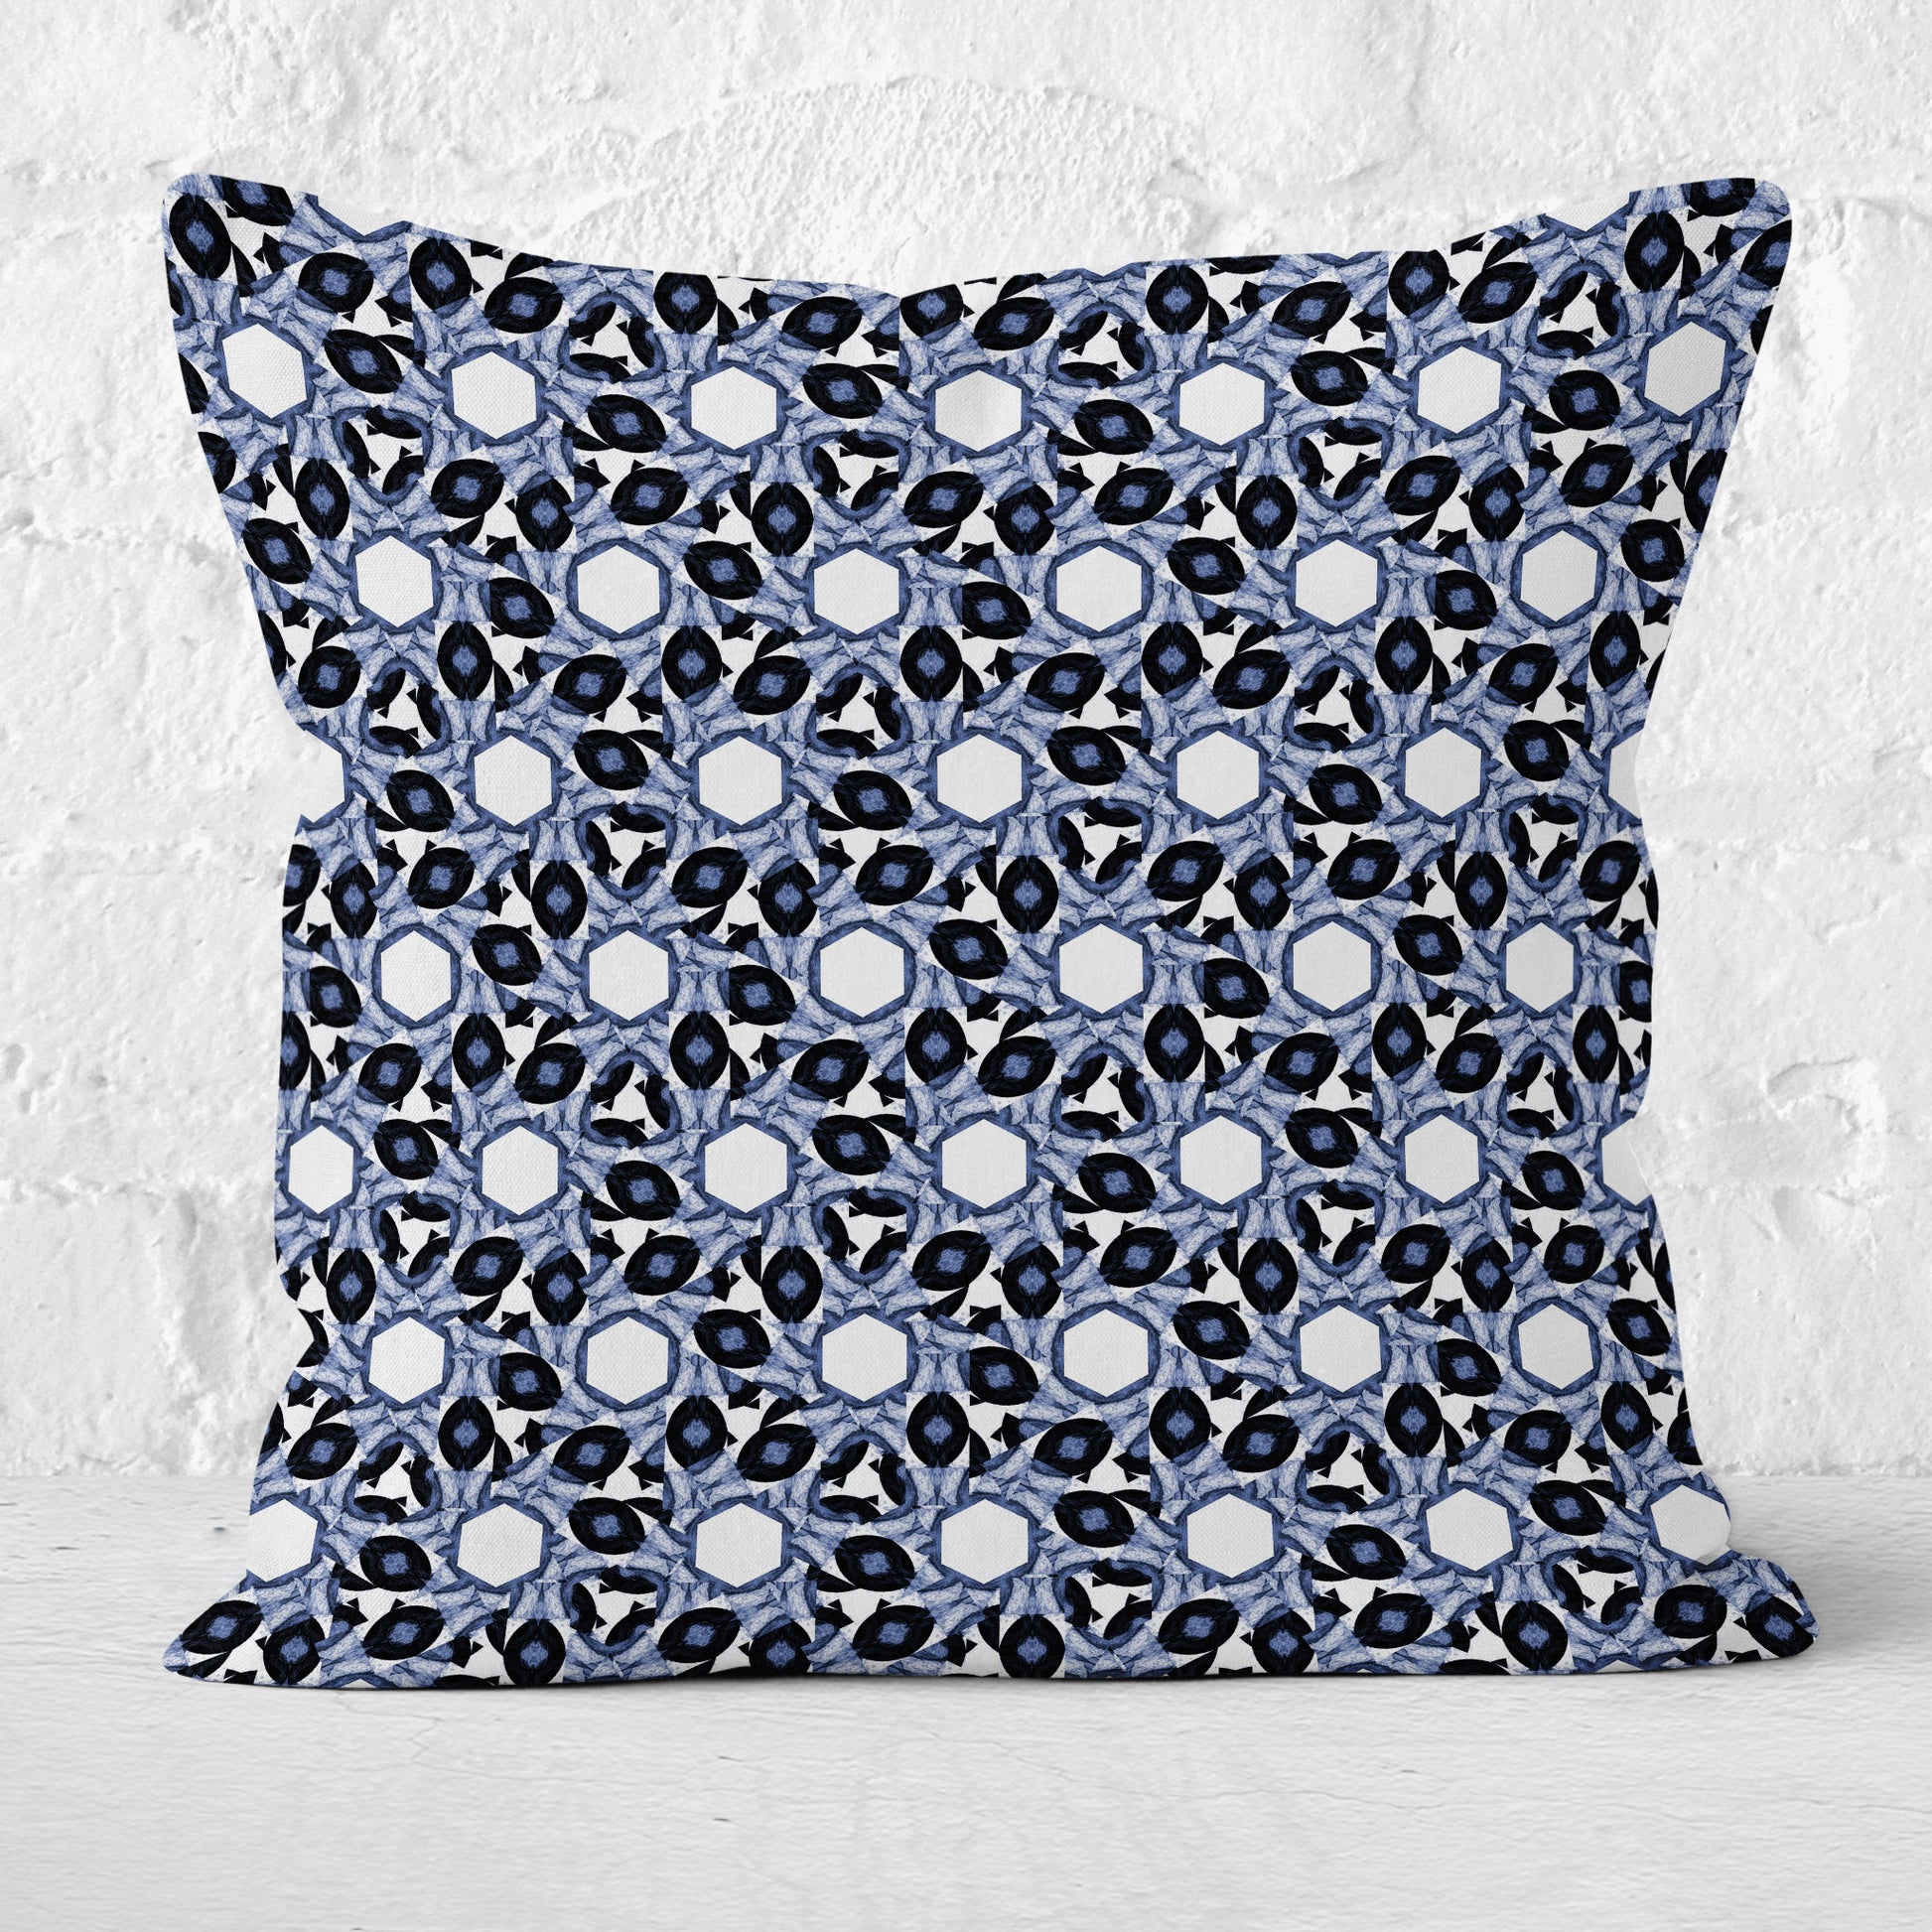 Throw pillow featuring abstract geometric blue and white pattern with a white brick wall in the background